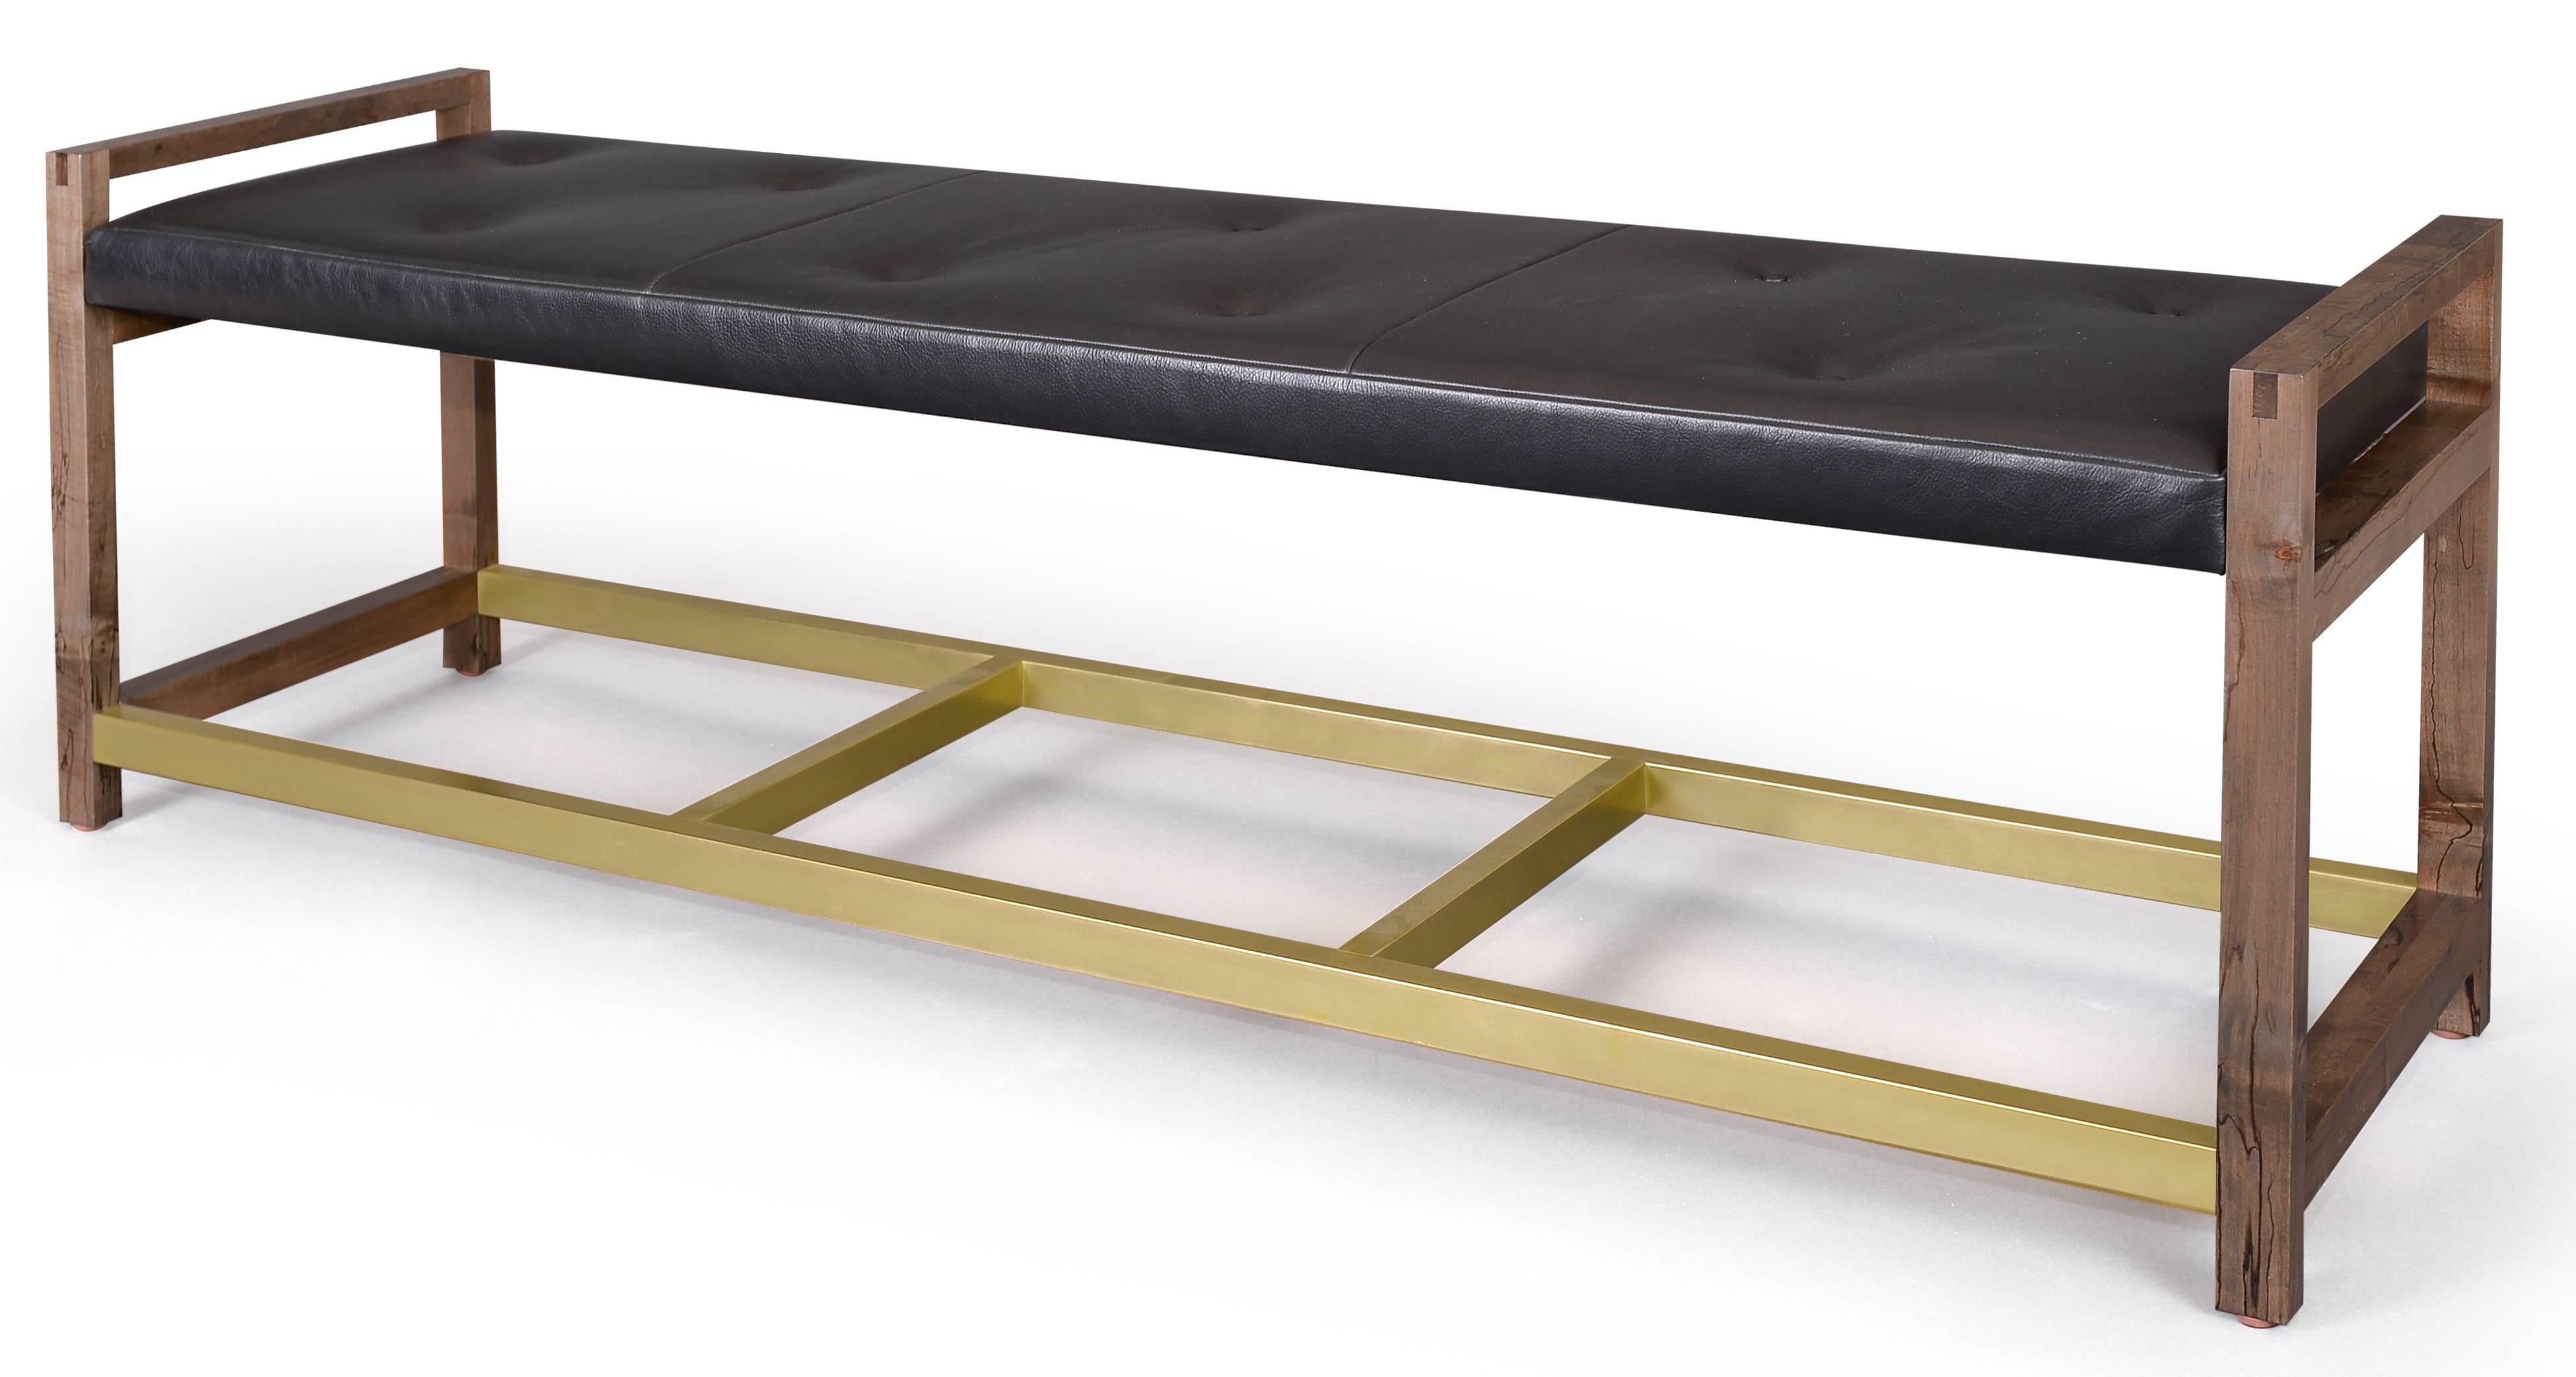 The timeless design of the Gotham bench features a black leather cushion on an oxidized Ambrosia maple and bronze base. Cushion material can be COM. 

One available in-stock:
L 65 in. / D 16 in. / H 22 in.

Standard size options - 10-12 week